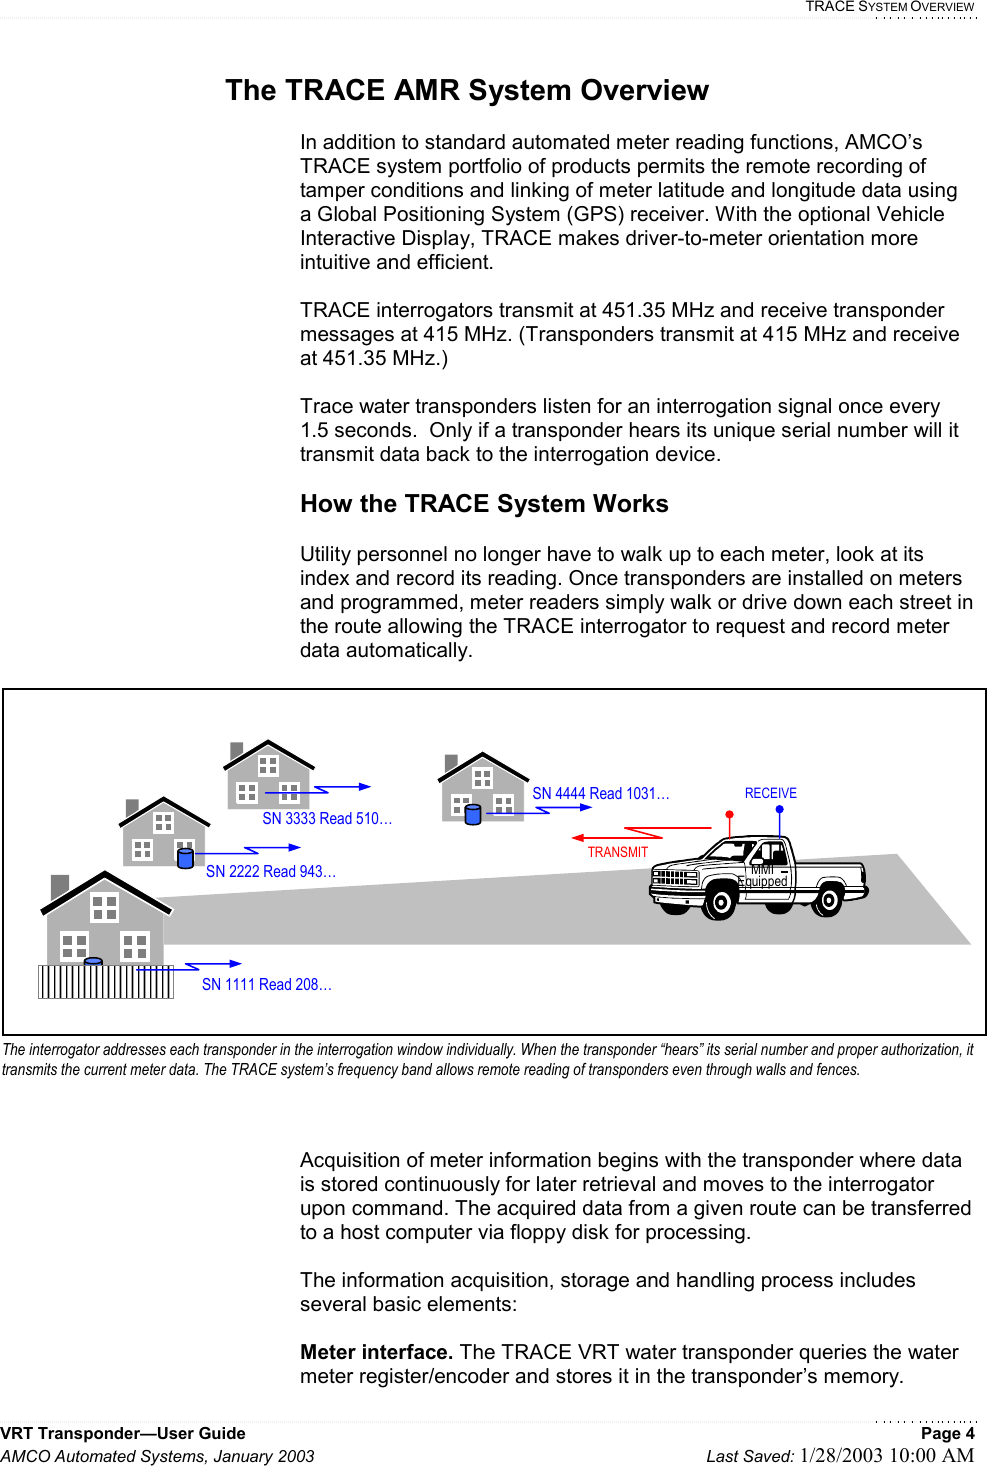   TRACE SYSTEM OVERVIEW VRT Transponder—User Guide    Page 4 AMCO Automated Systems, January 2003    Last Saved: 1/28/2003 10:00 AM  The TRACE AMR System Overview  In addition to standard automated meter reading functions, AMCO’s TRACE system portfolio of products permits the remote recording of tamper conditions and linking of meter latitude and longitude data using a Global Positioning System (GPS) receiver. With the optional Vehicle Interactive Display, TRACE makes driver-to-meter orientation more intuitive and efficient.   TRACE interrogators transmit at 451.35 MHz and receive transponder messages at 415 MHz. (Transponders transmit at 415 MHz and receive at 451.35 MHz.)    Trace water transponders listen for an interrogation signal once every 1.5 seconds.  Only if a transponder hears its unique serial number will it transmit data back to the interrogation device.  How the TRACE System Works  Utility personnel no longer have to walk up to each meter, look at its index and record its reading. Once transponders are installed on meters and programmed, meter readers simply walk or drive down each street in the route allowing the TRACE interrogator to request and record meter data automatically.  Acquisition of meter information begins with the transponder where data is stored continuously for later retrieval and moves to the interrogator upon command. The acquired data from a given route can be transferred to a host computer via floppy disk for processing.  The information acquisition, storage and handling process includes several basic elements:  Meter interface. The TRACE VRT water transponder queries the water meter register/encoder and stores it in the transponder’s memory.  SN 1111 Read 208… SN 2222 Read 943… MMI Equipped SN 3333 Read 510…SN 4444 Read 1031…TRANSMITRECEIVEThe interrogator addresses each transponder in the interrogation window individually. When the transponder “hears” its serial number and proper authorization, it transmits the current meter data. The TRACE system’s frequency band allows remote reading of transponders even through walls and fences.  